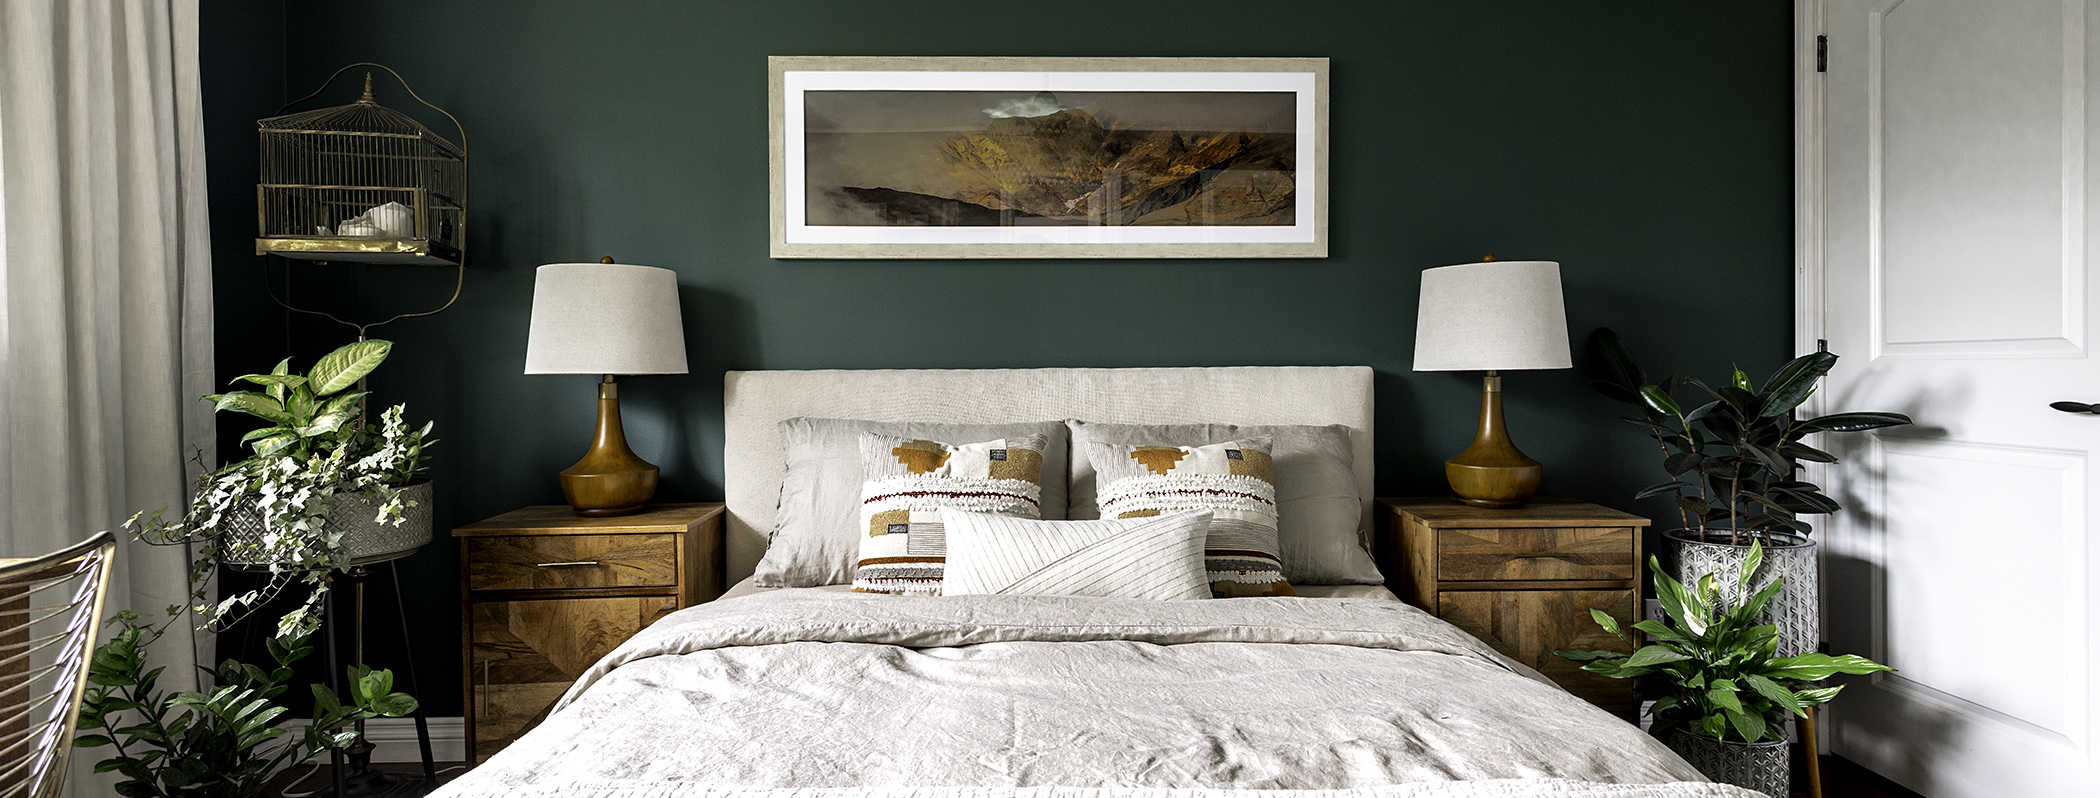 dark green bedroom with wood and brass decor